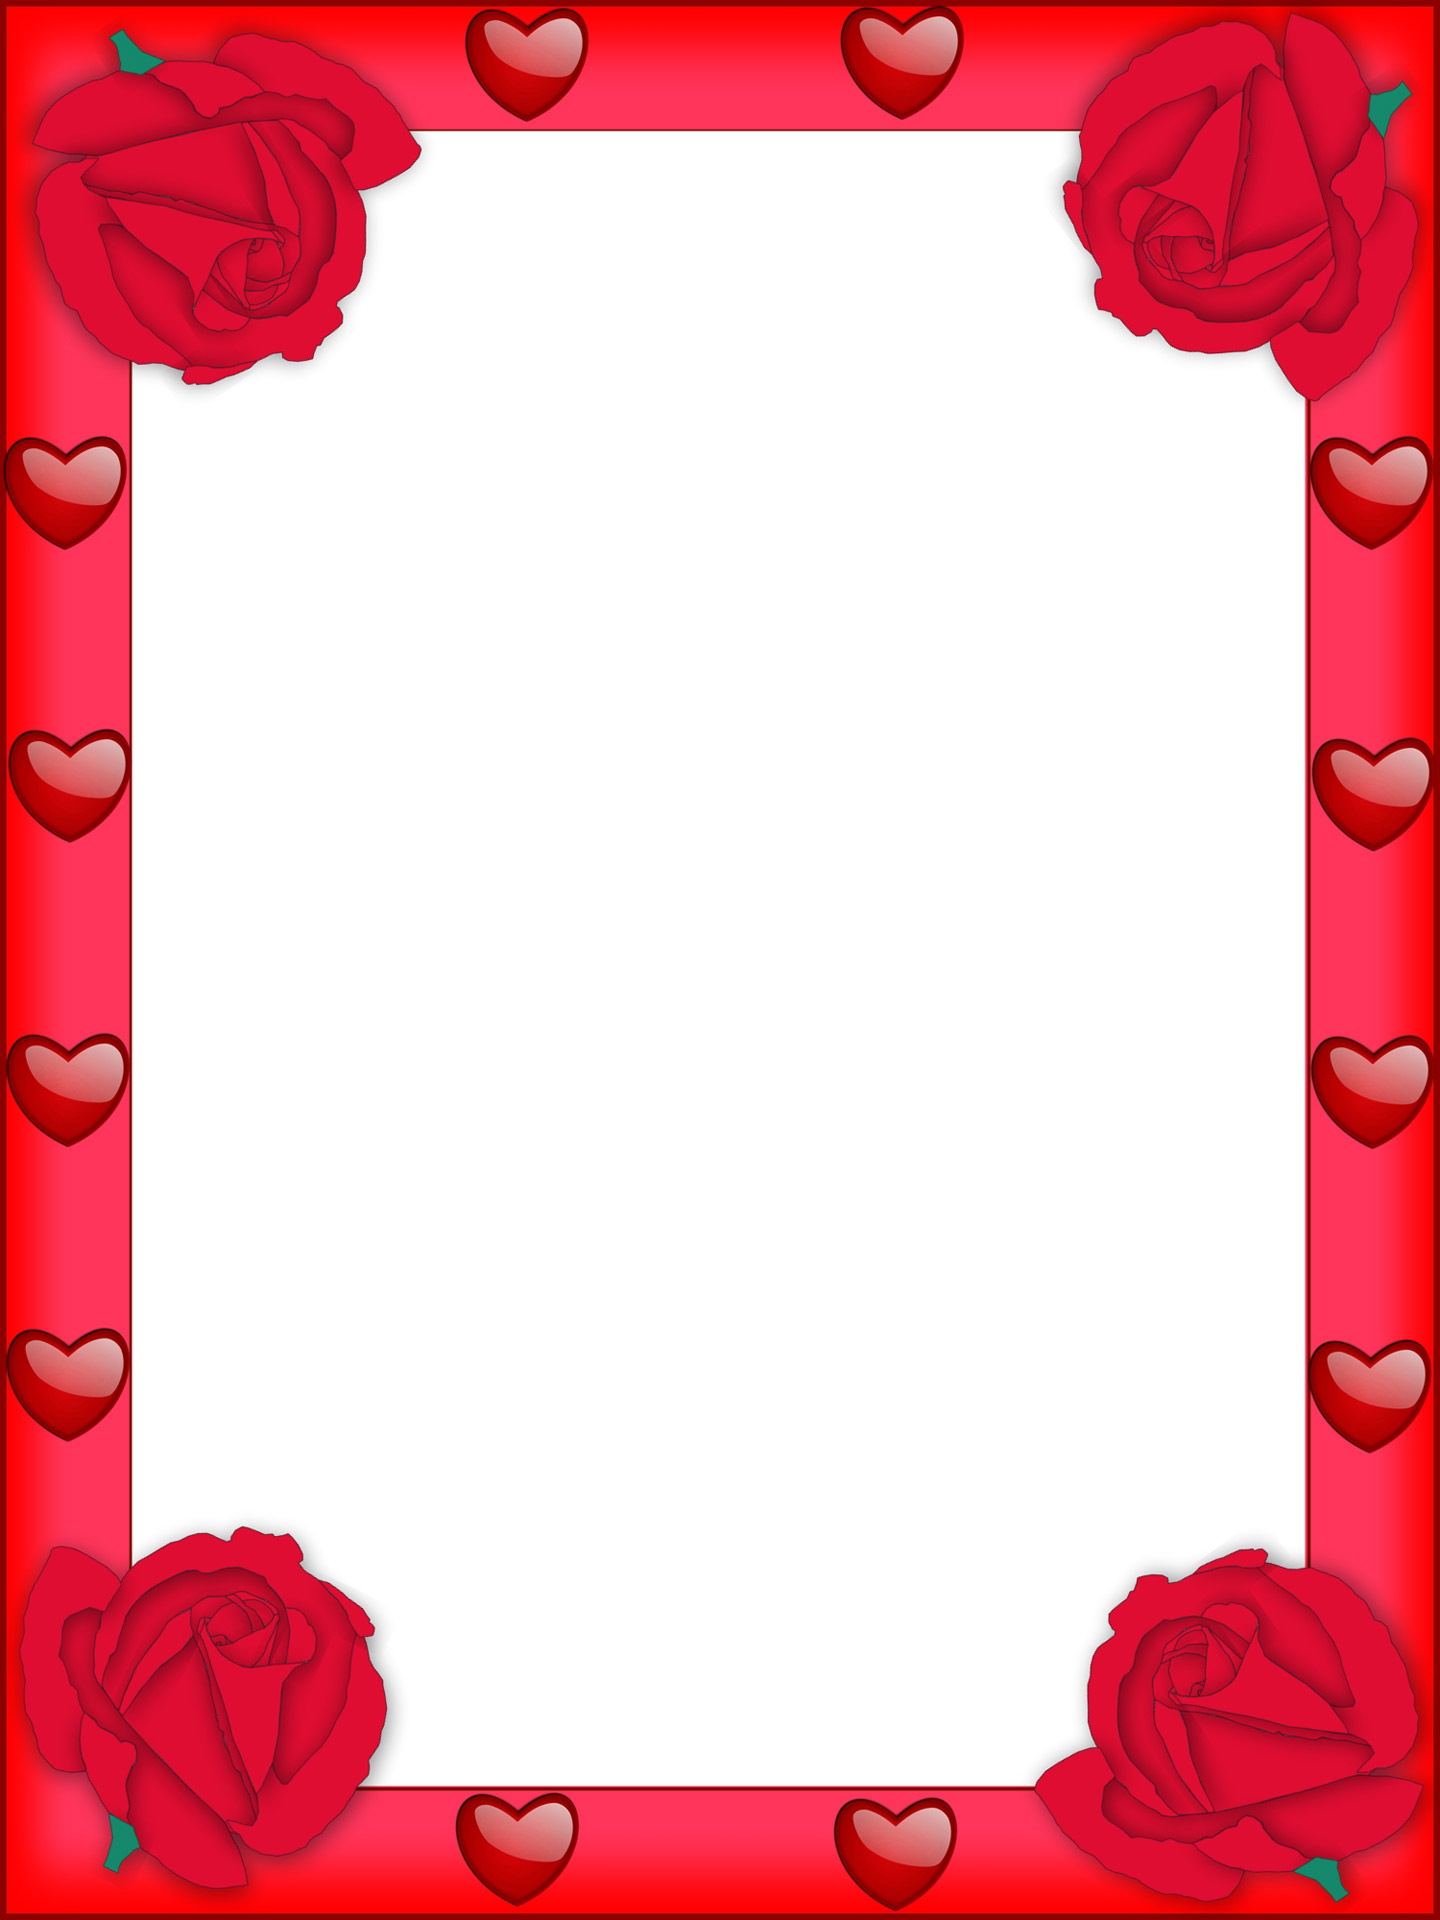 background love message free photo